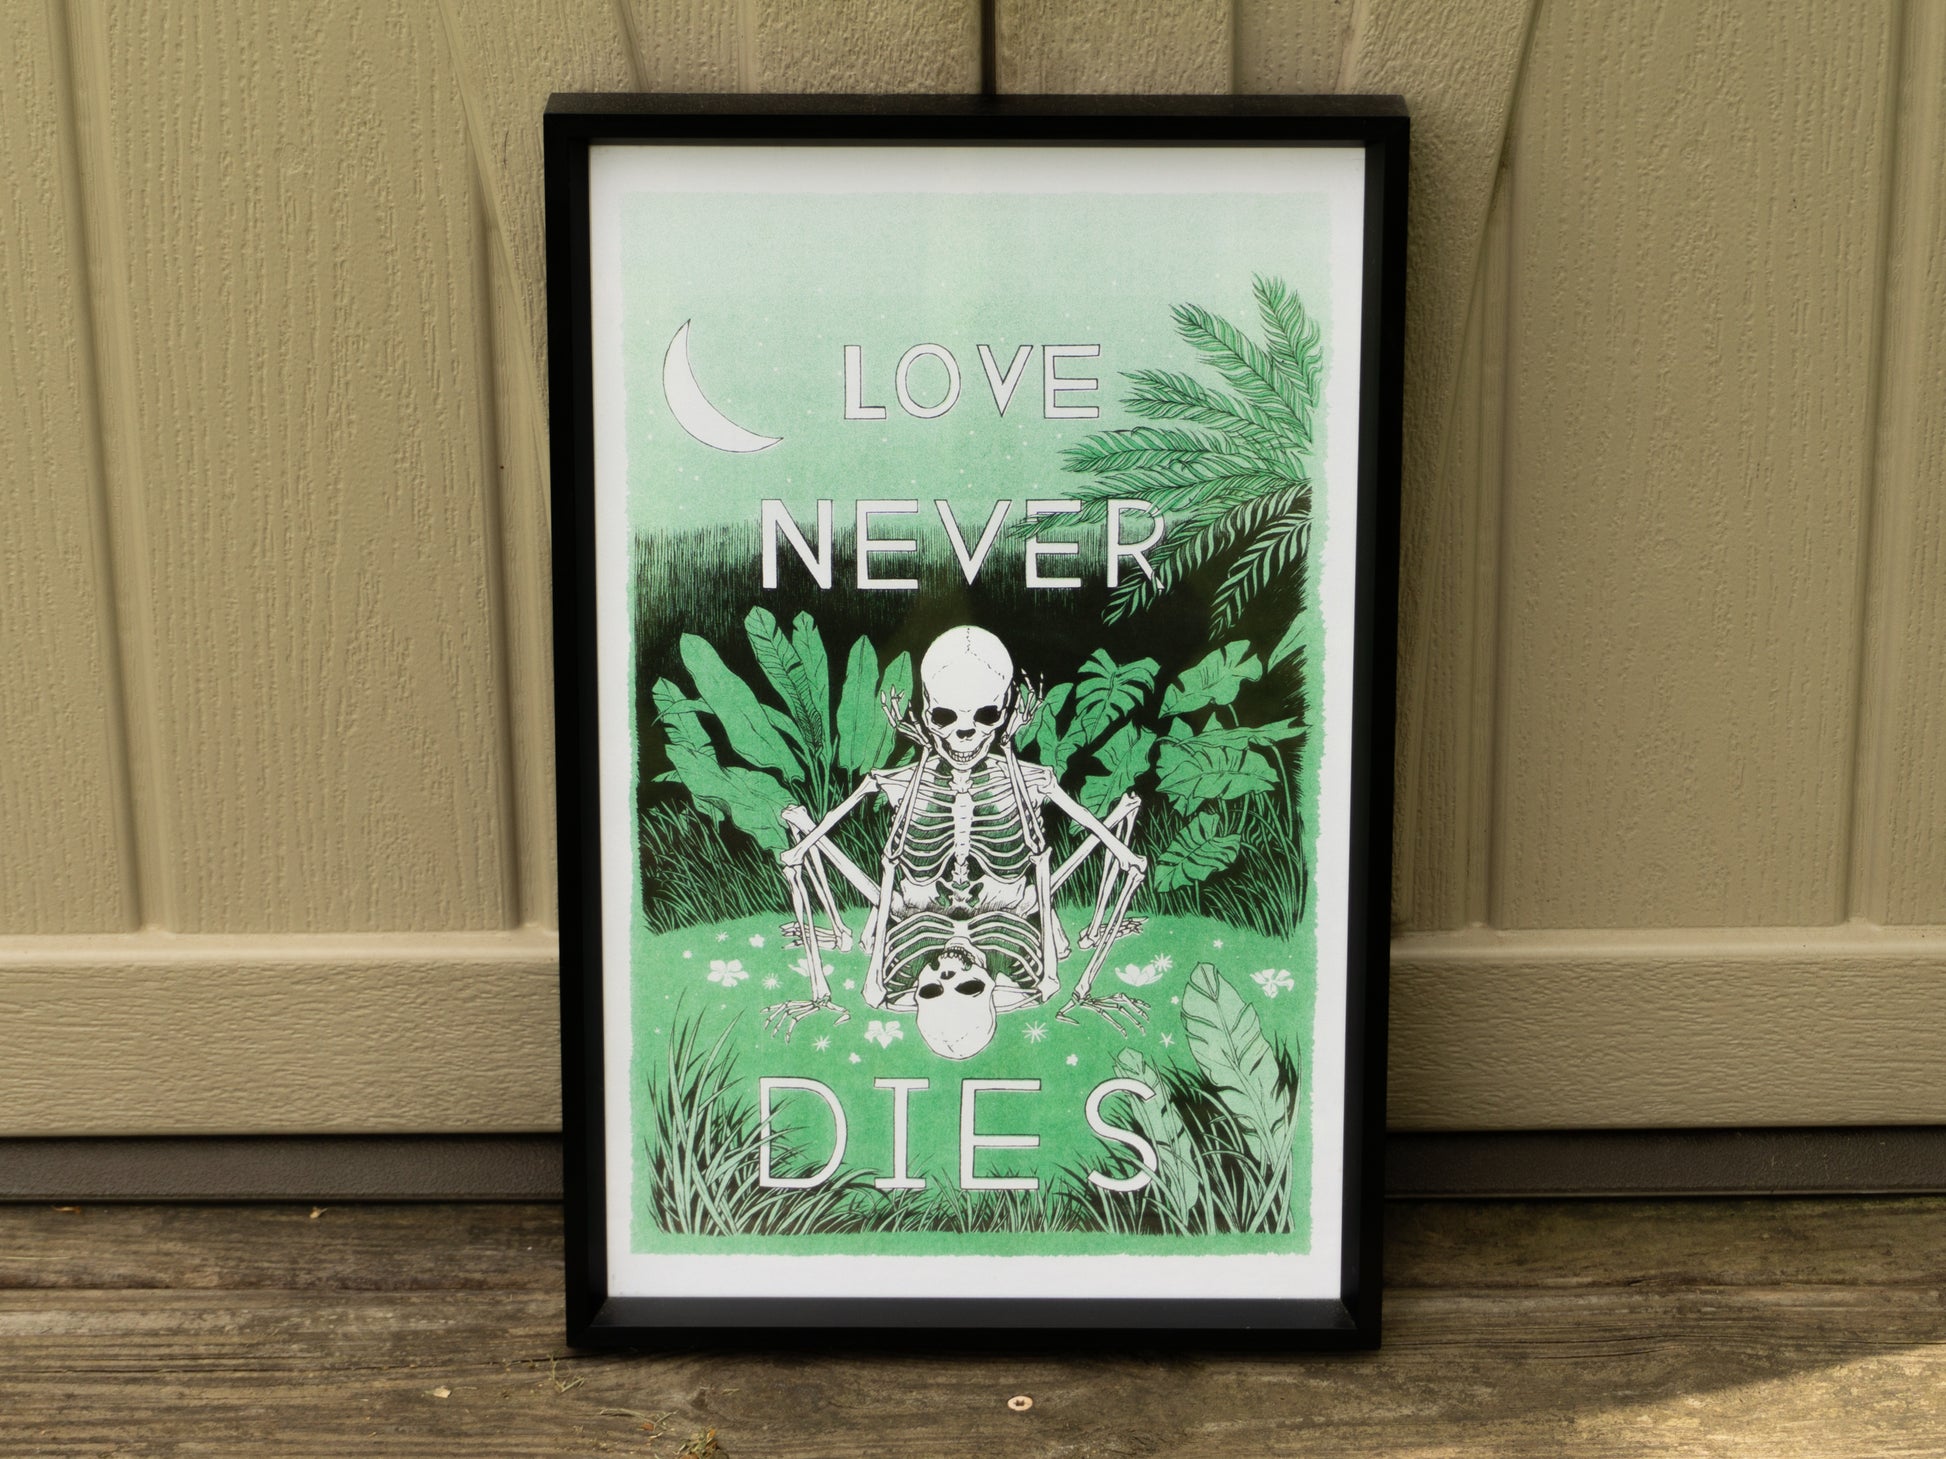 A risograph print framed in a black picture frame outside. The artwork has two skeletons in love doing it in a field of green.